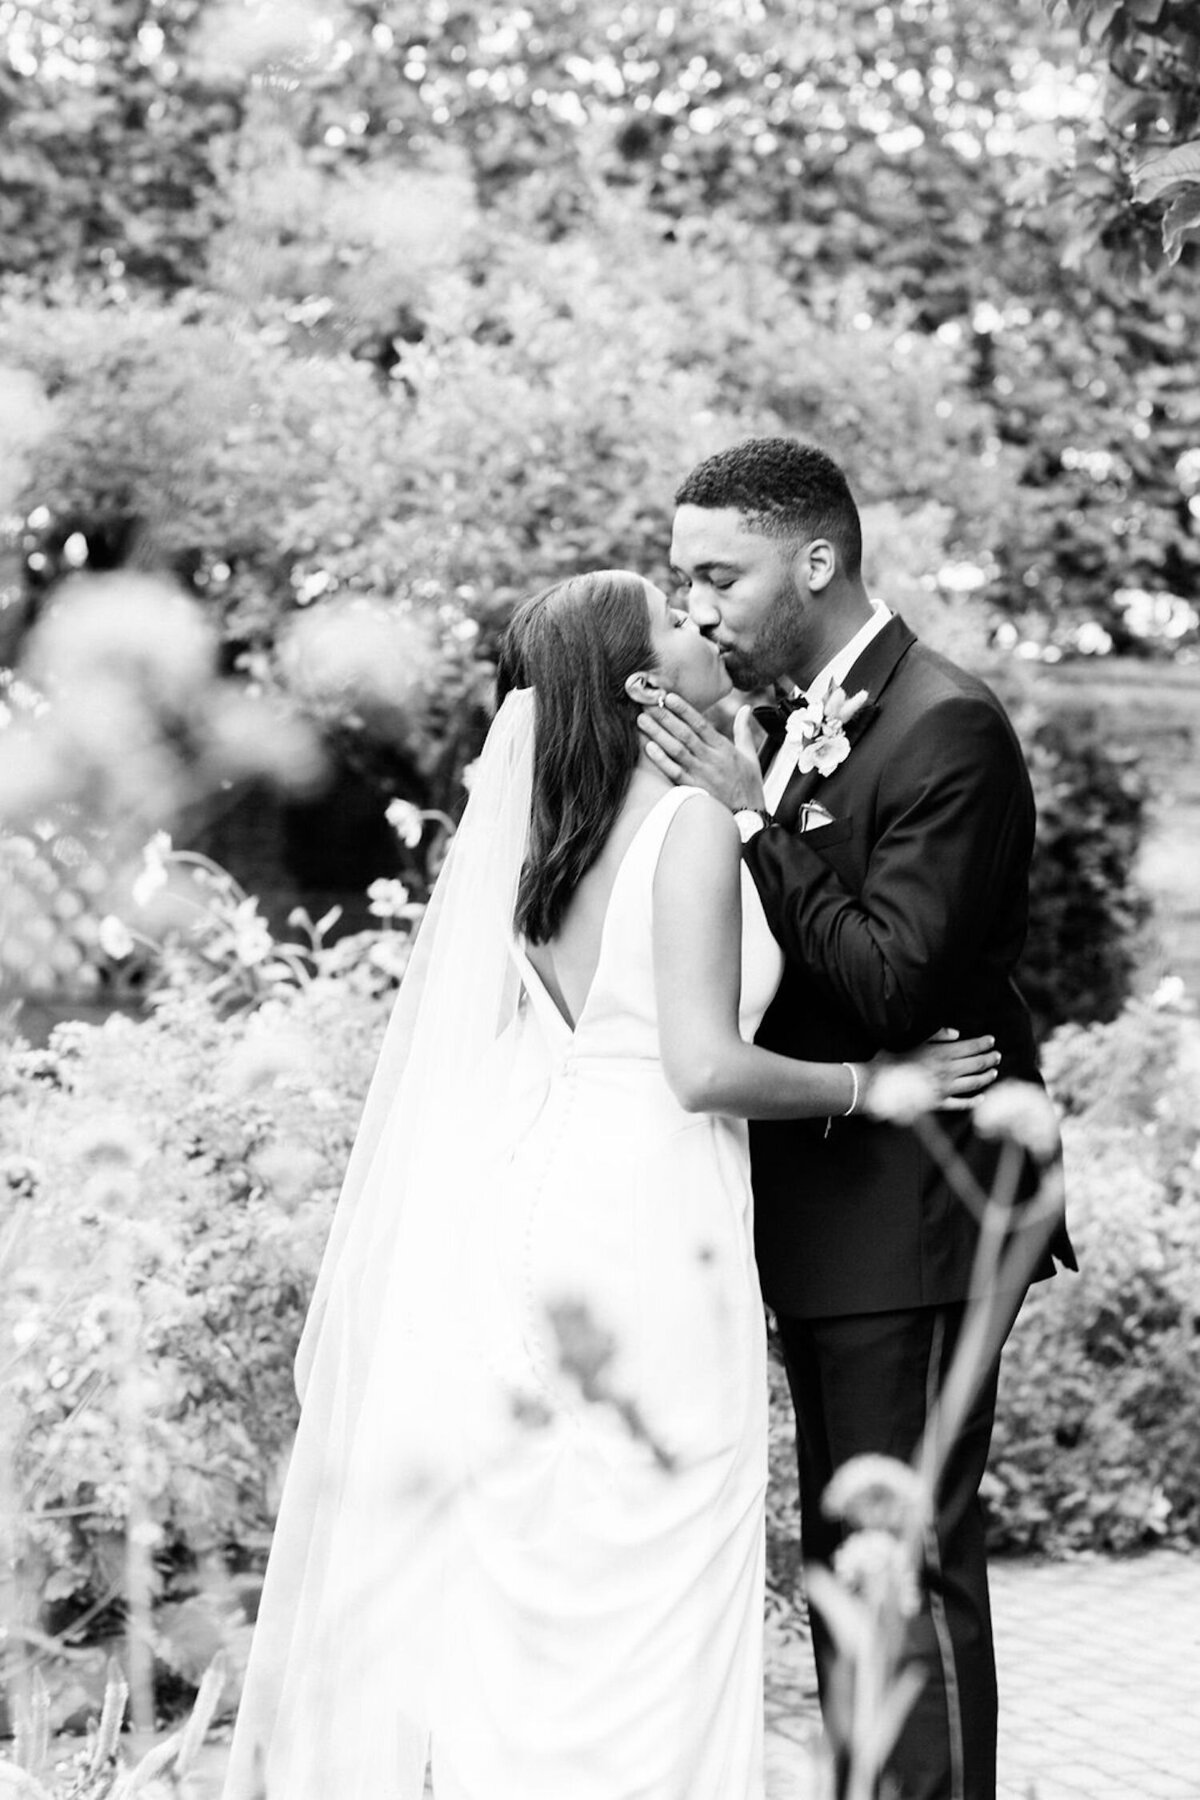 Black and White Bridal Portrait at Luxury Chicago North Shore Outdoor Wedding Venue